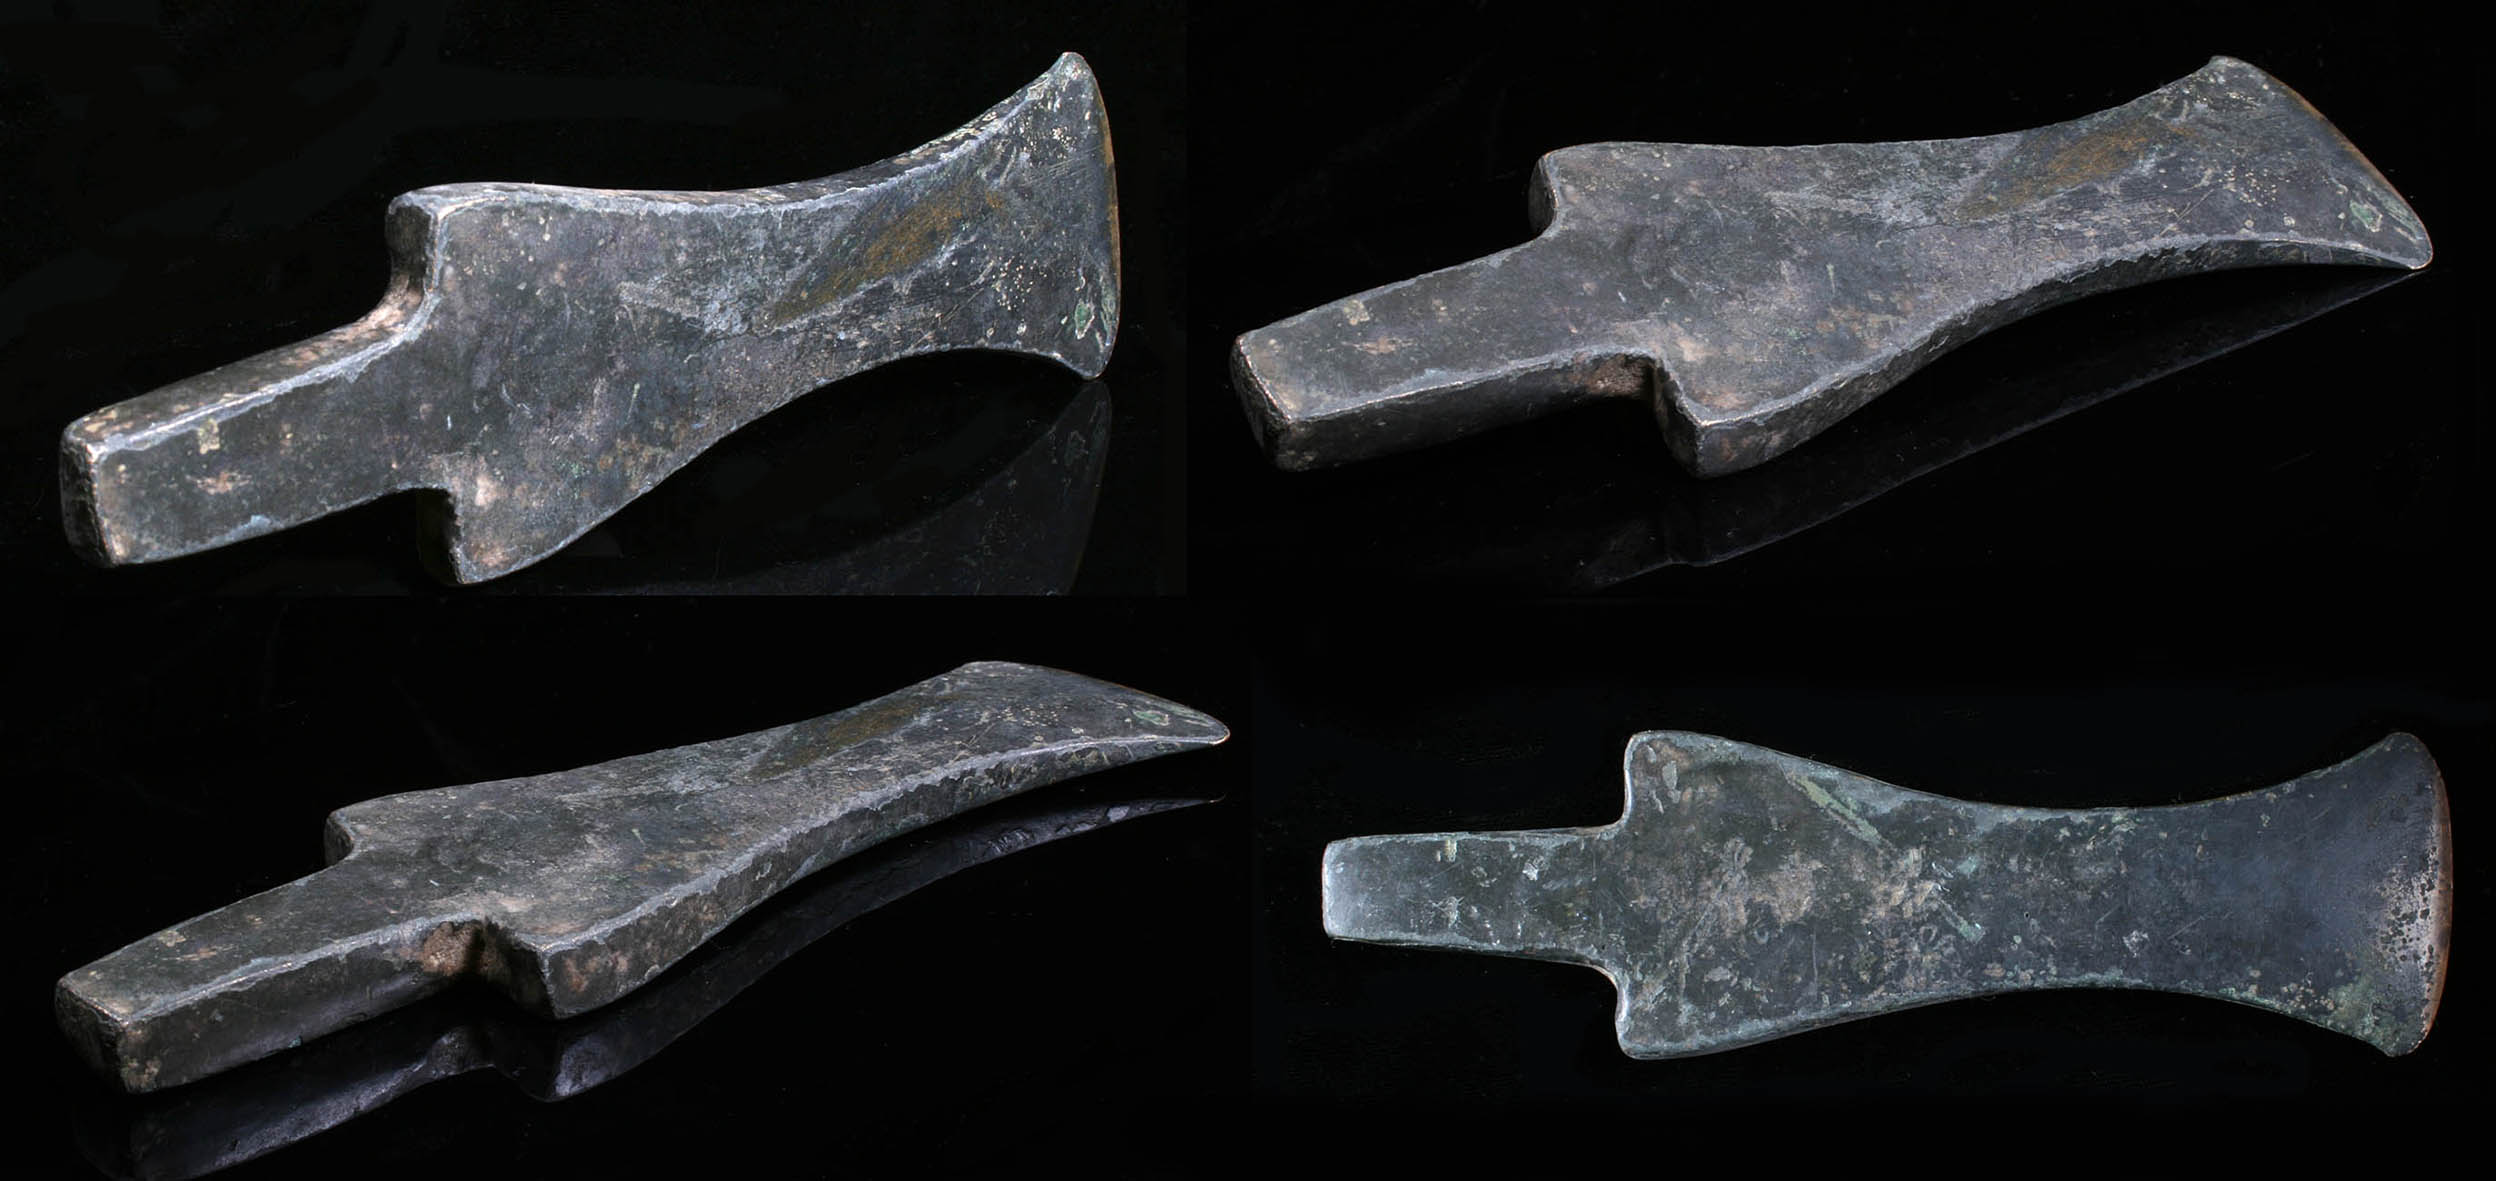 Bronze Age axes,adzes and other ancient weapons & tools